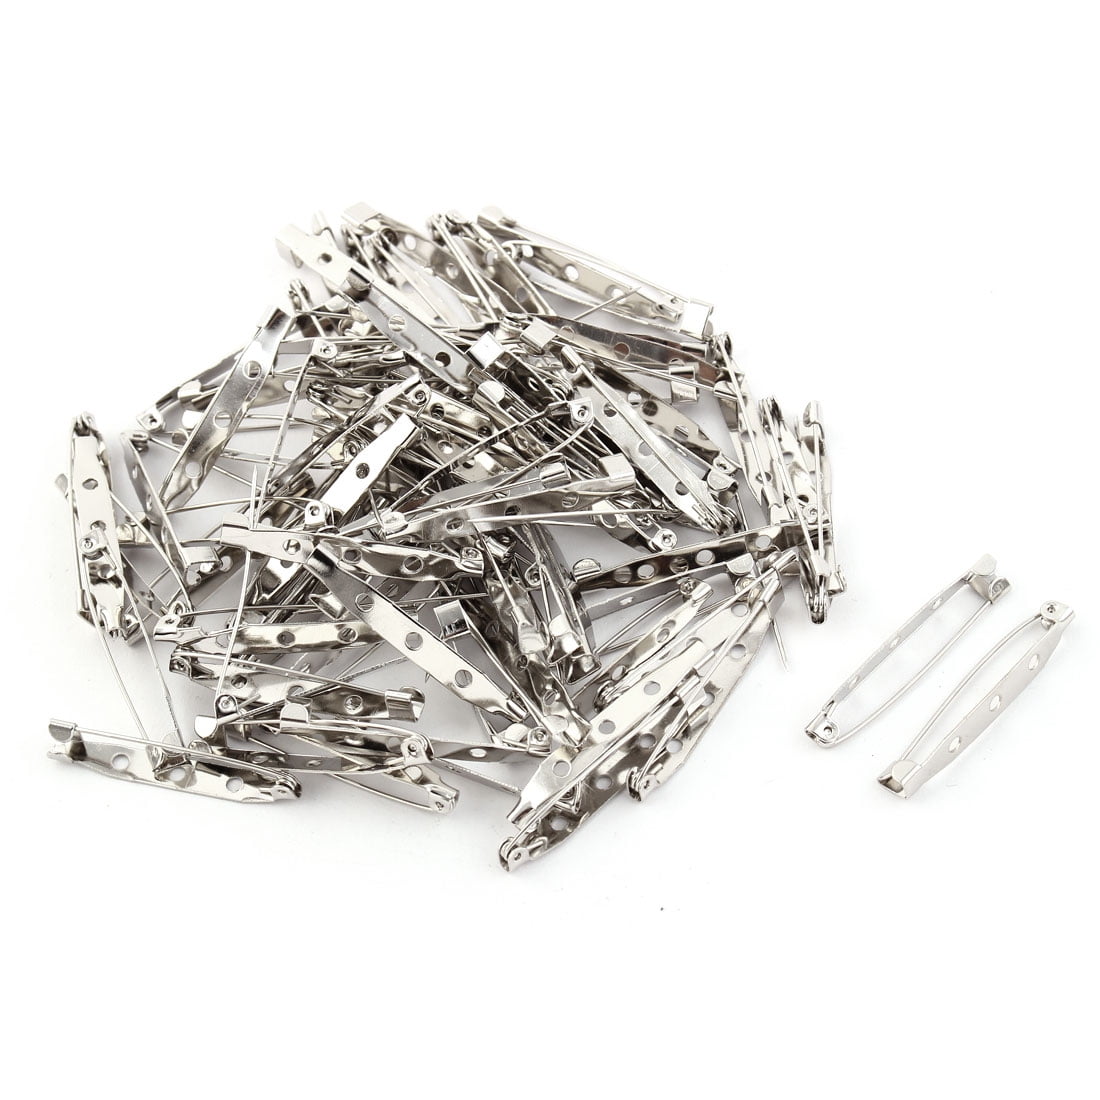 Pack of 30 Safety Pins , Heavy Duty Blanket Pins Bulk Steel Spring Lock  Pins Fasteners for Blankets Crafts Skirts Kilts Brooch Making, 